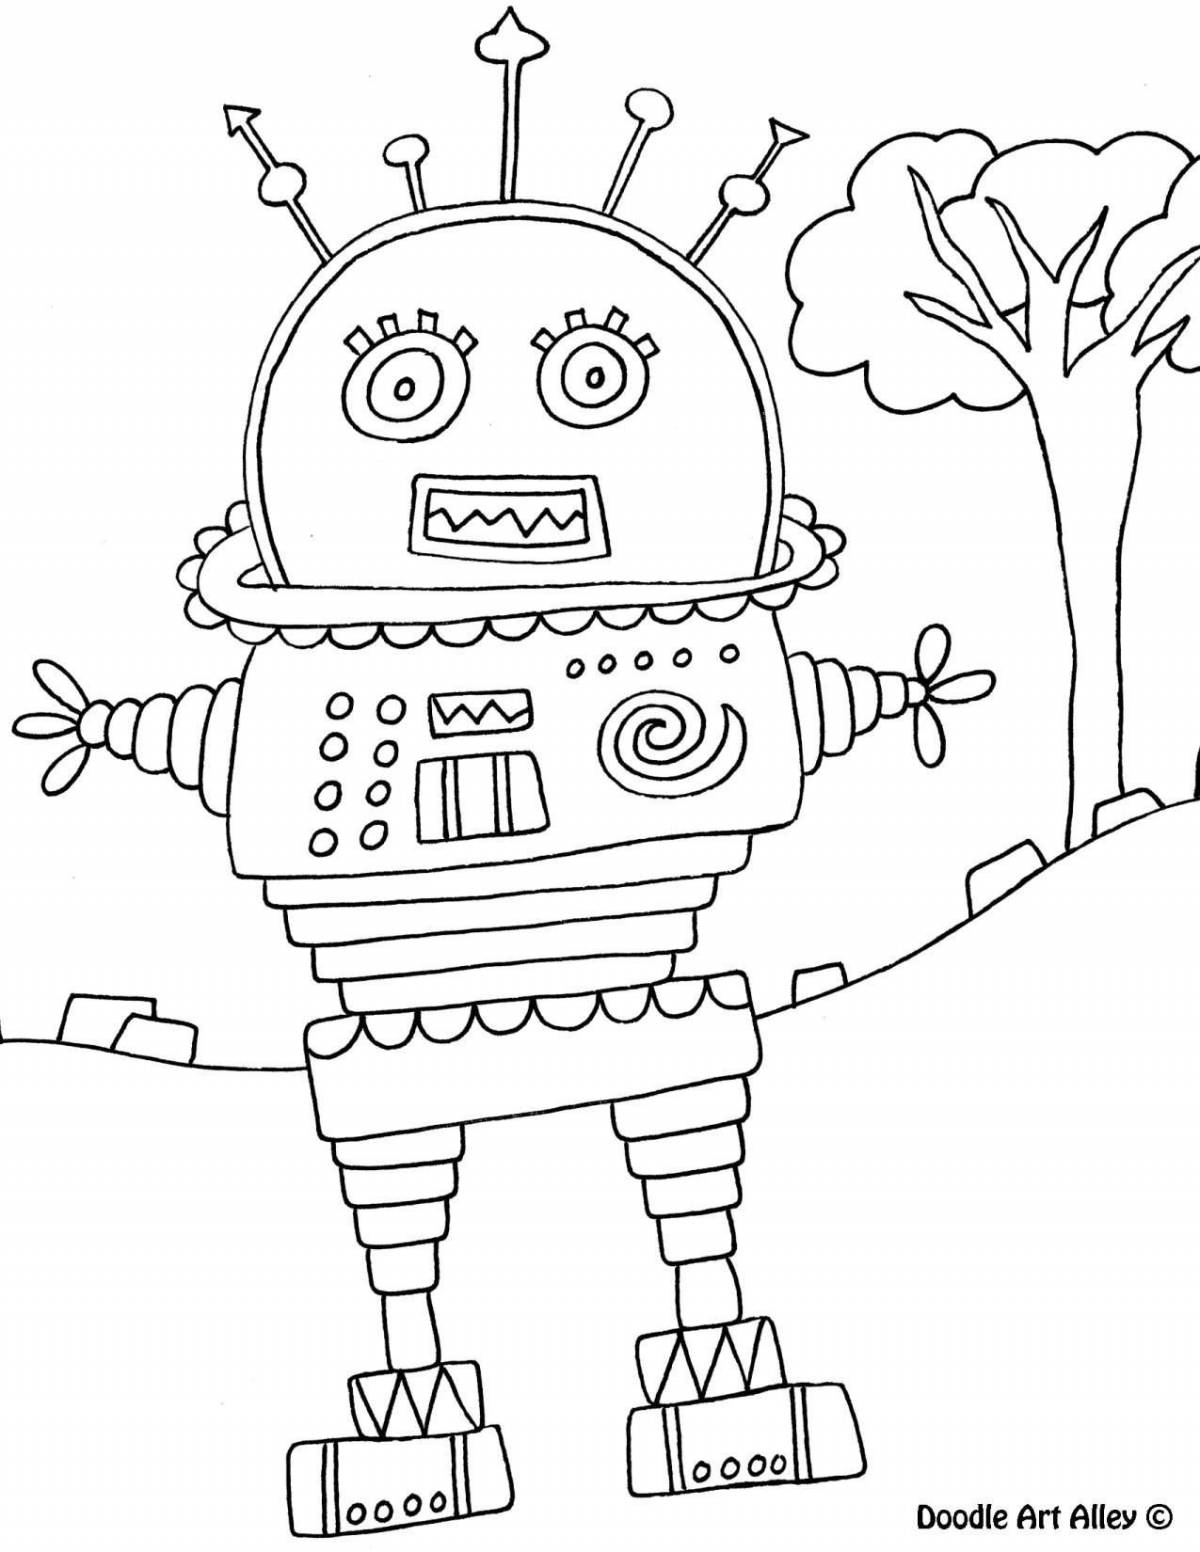 Coloring robot teacher with imagination